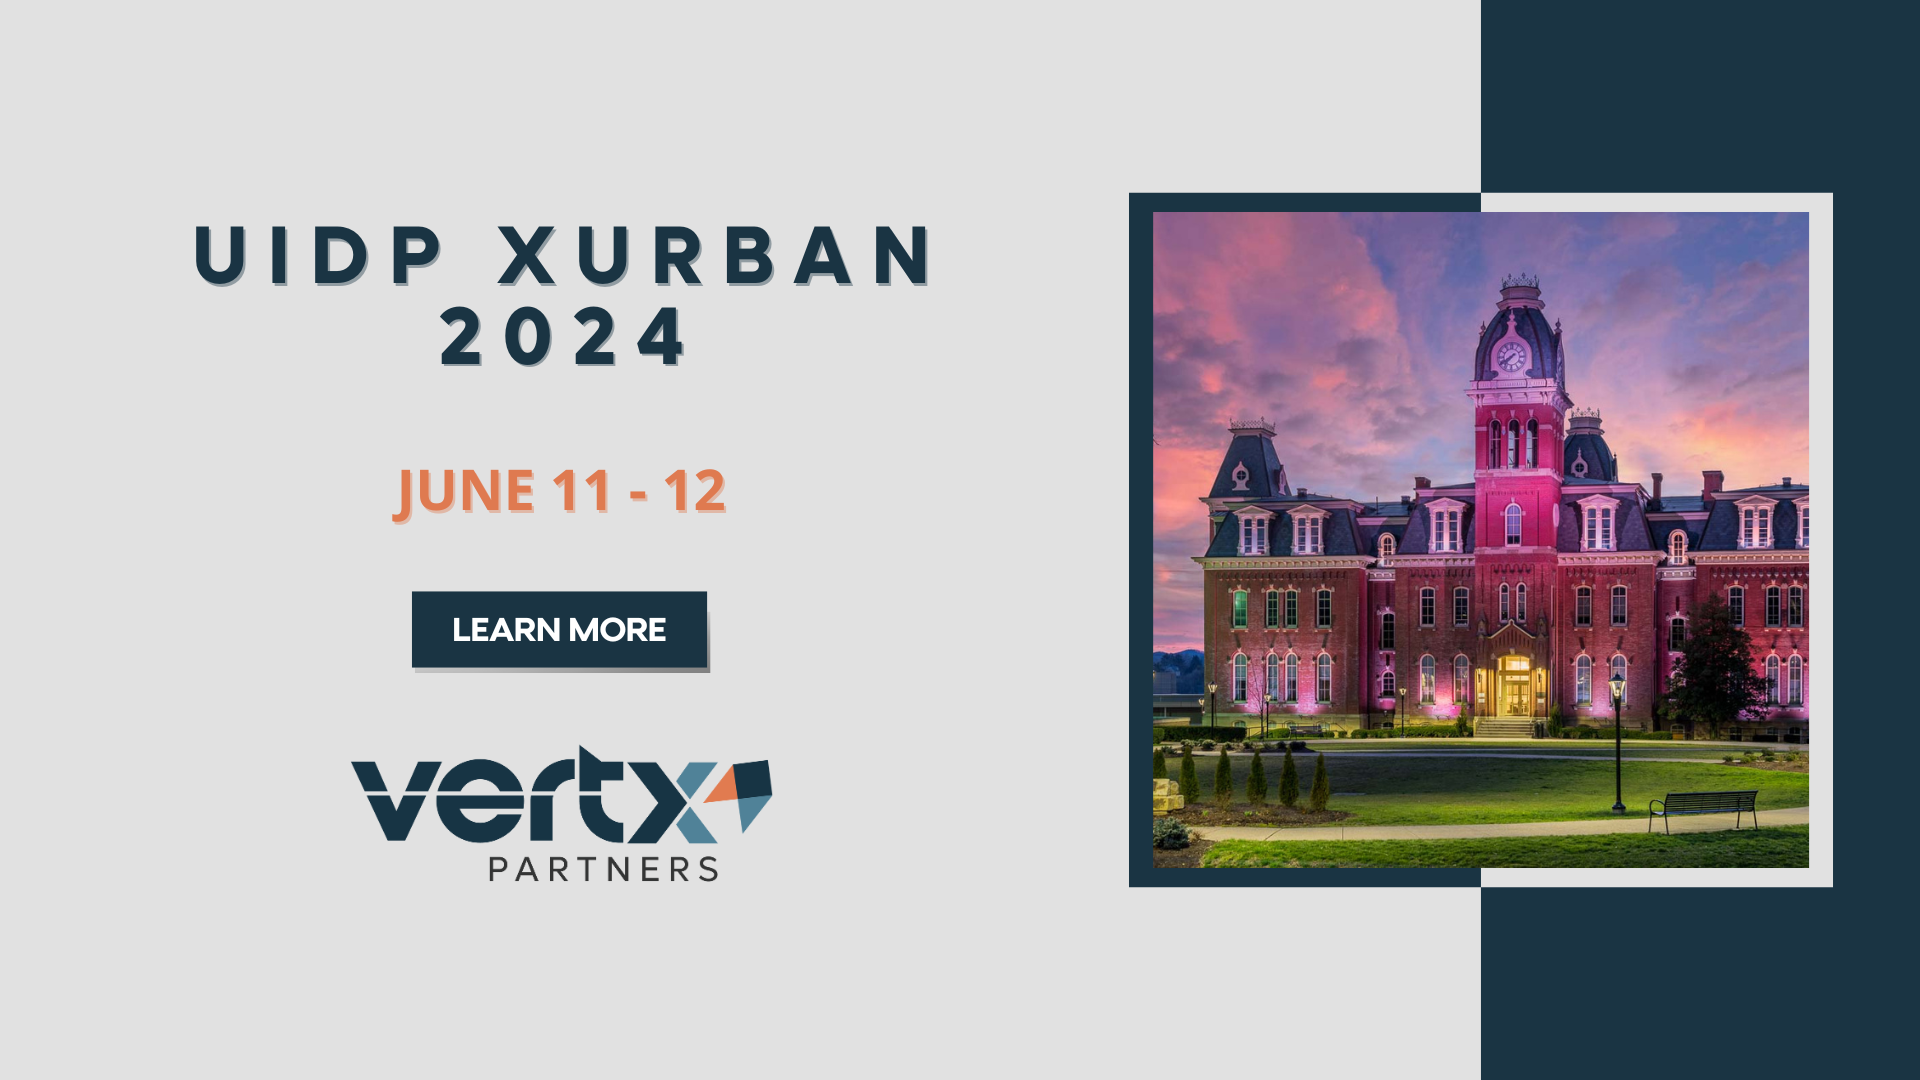 This graphic has the title UIDP Xurban 2024 with the date june 11-12 under it and a photo of WVU's Woodburn Hall with a sunset in the background.